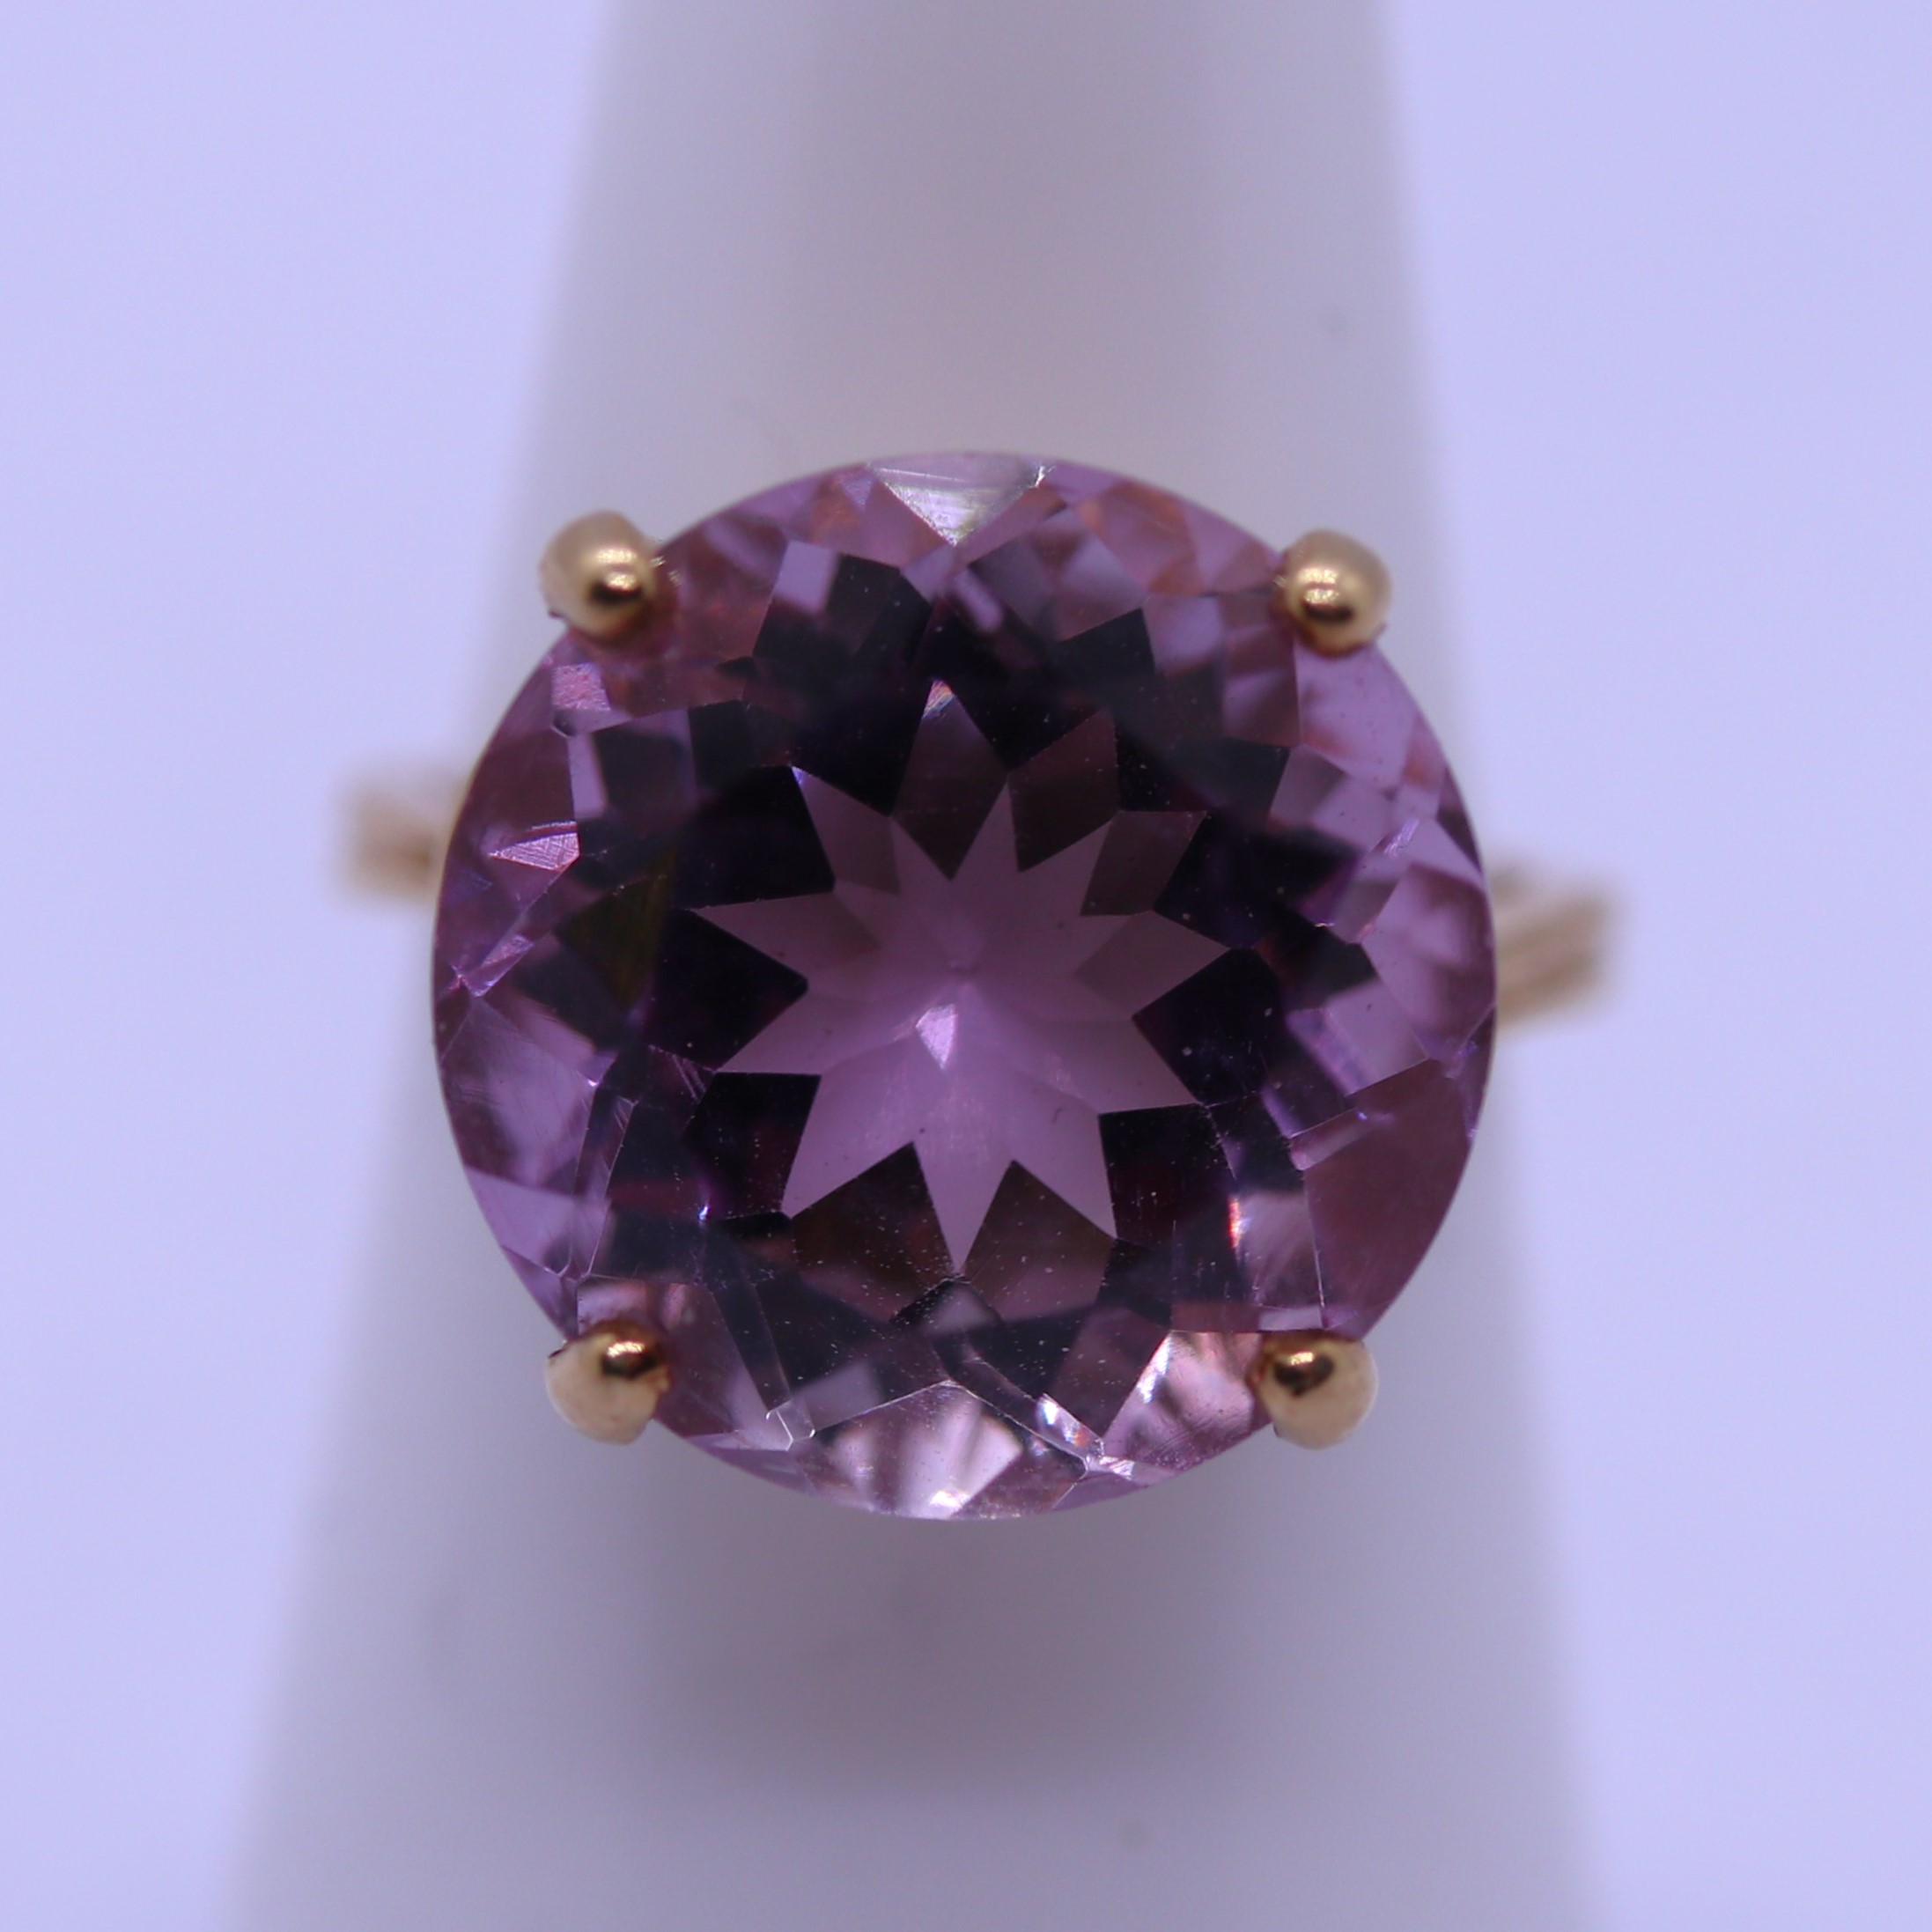 9ct gold large amethyst set ring - Size N - Image 3 of 3